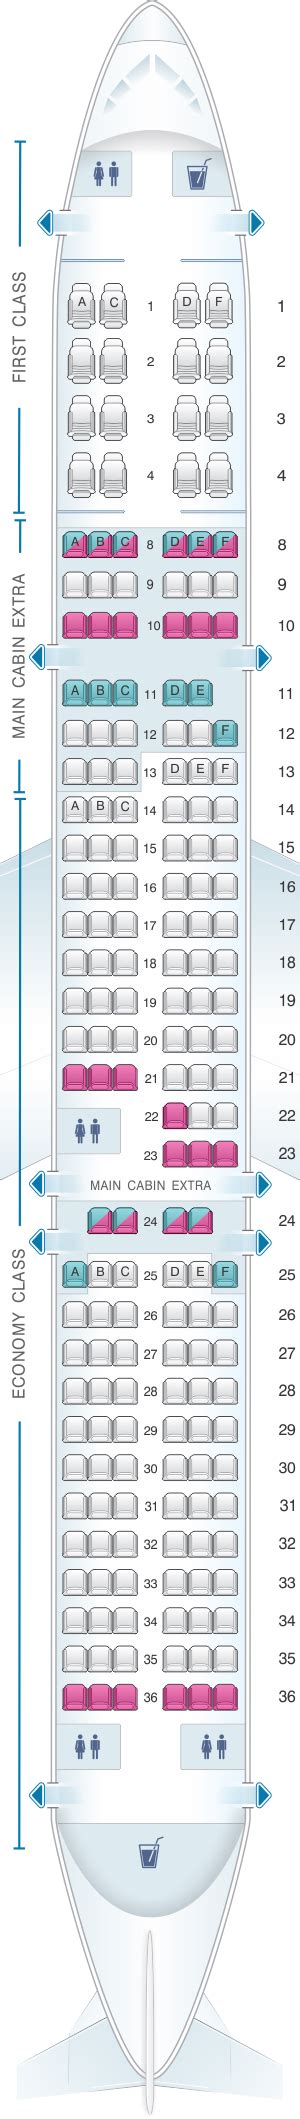 American Airlines Airbus A321 Seat Map; Seat 11a; American Airline